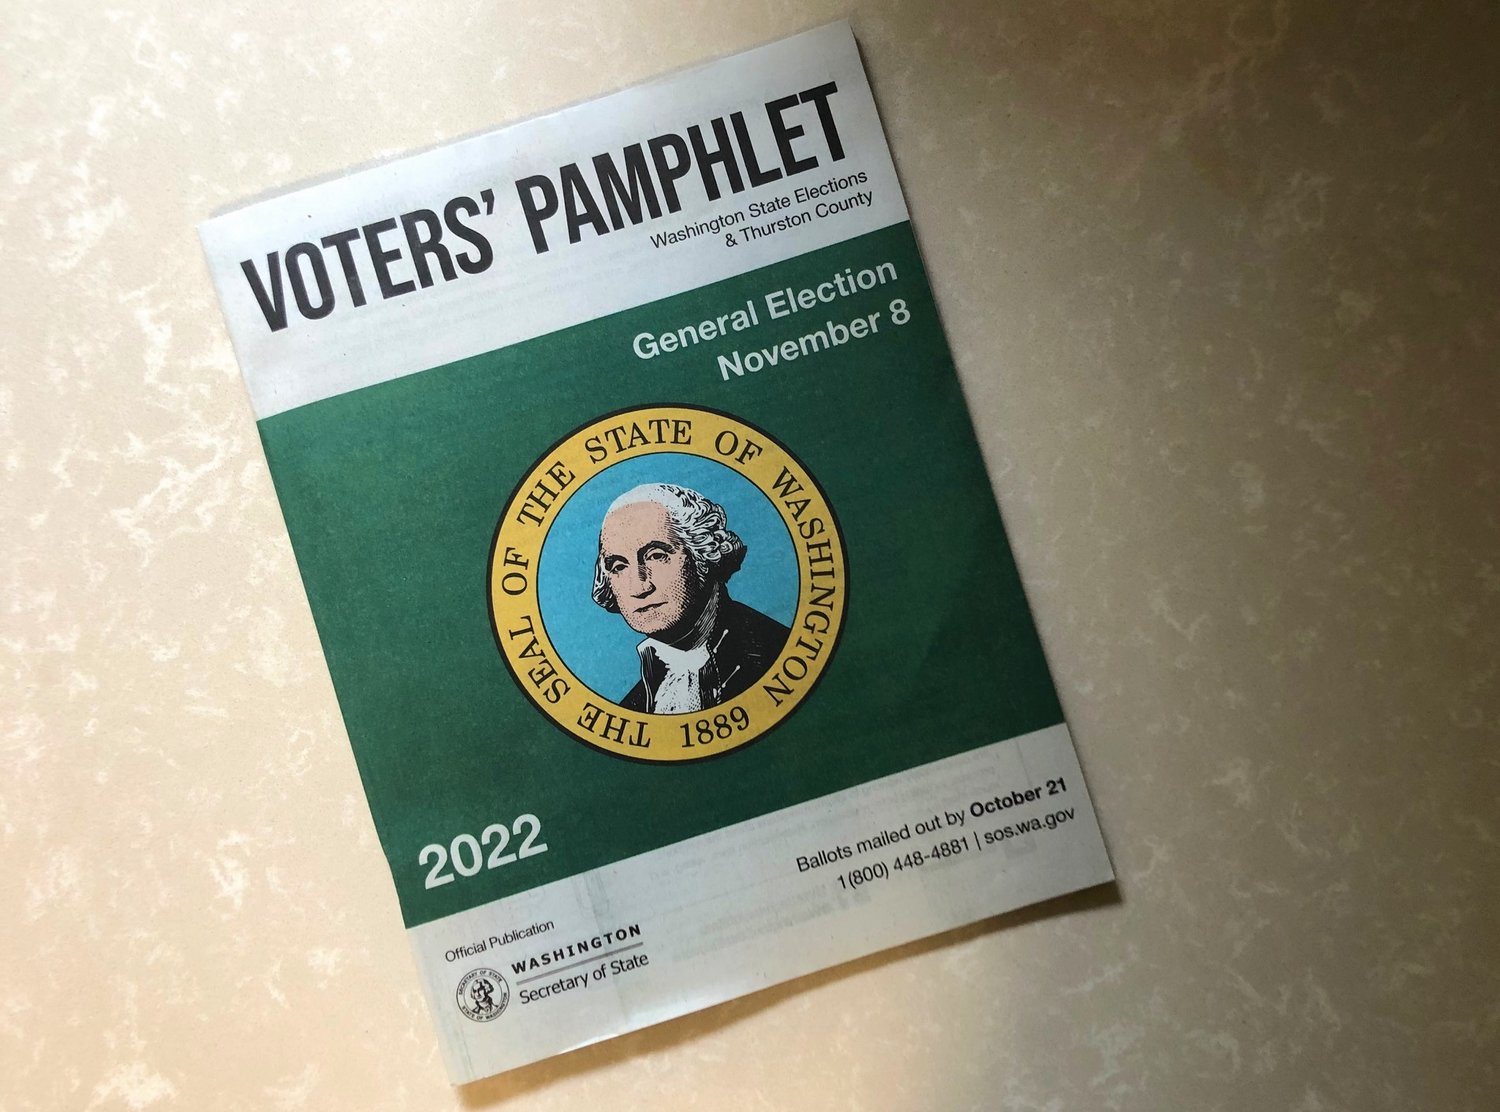 Local voting pamphlets and ballots are already arriving for General Election for Thurston County.